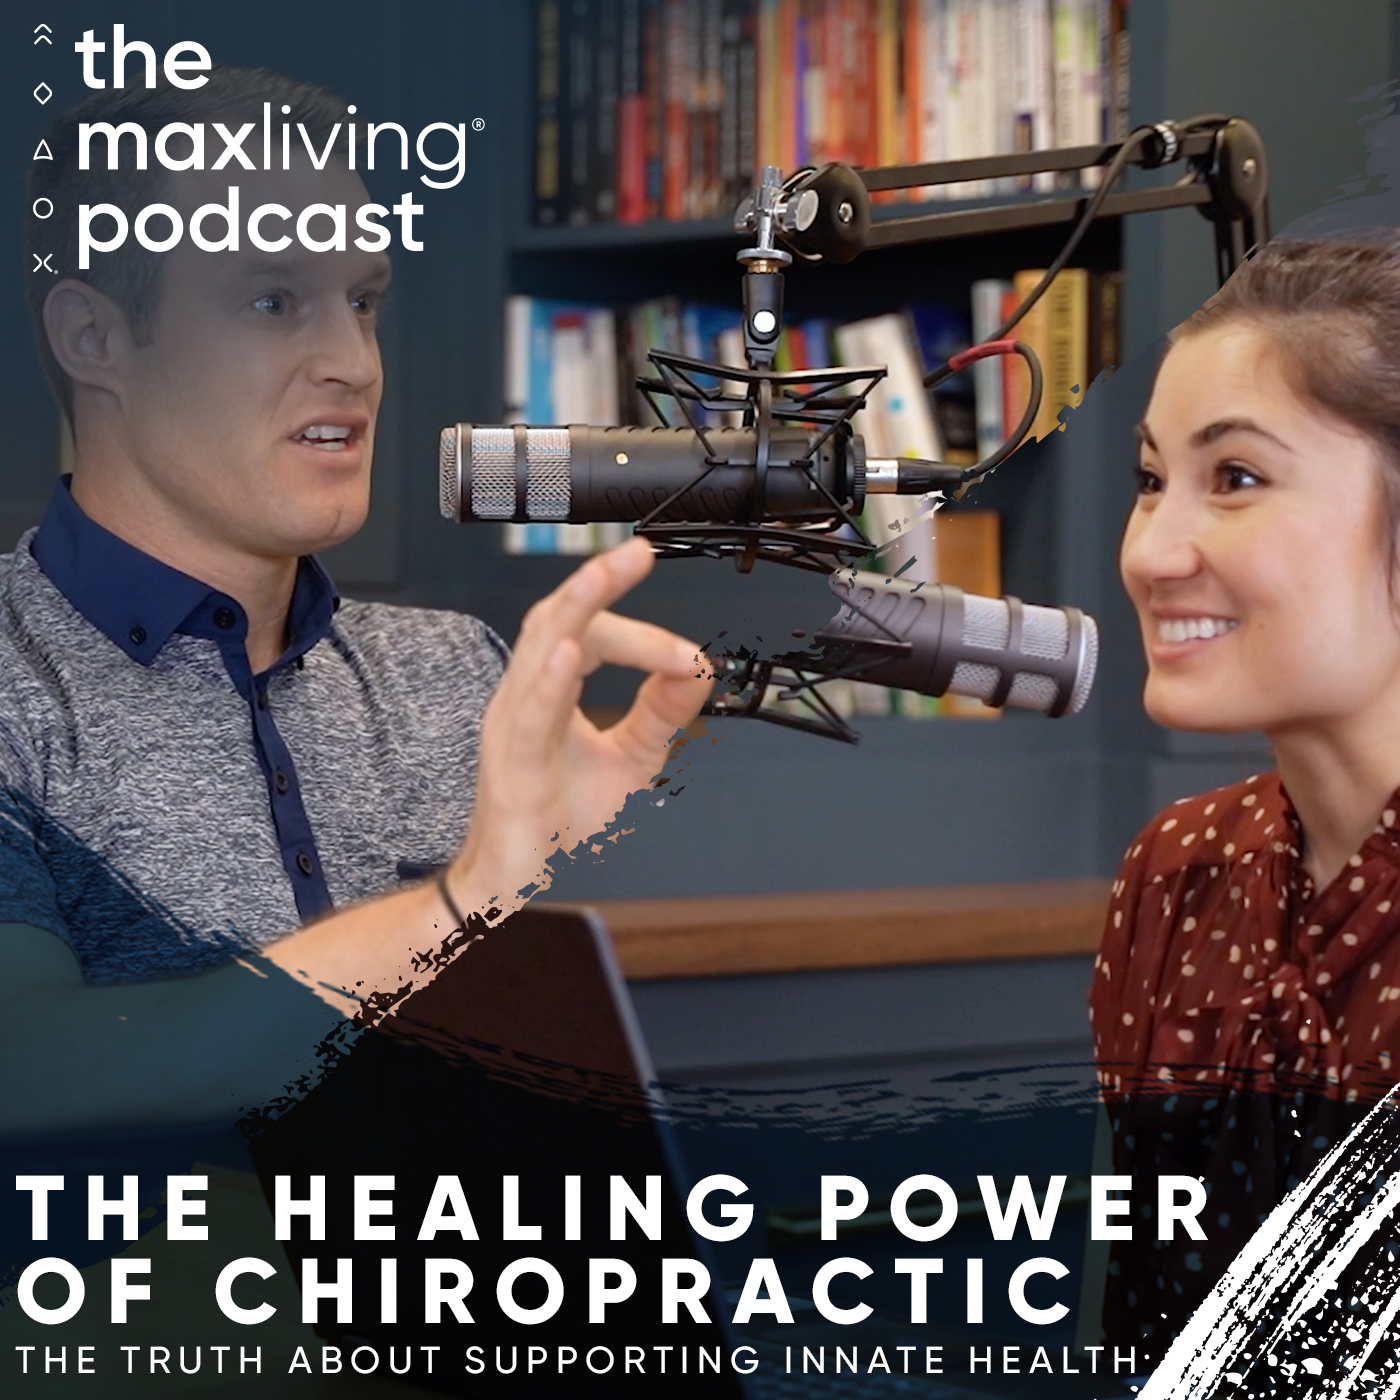 Episode 5 - Can Chiropractic Help My Condition?